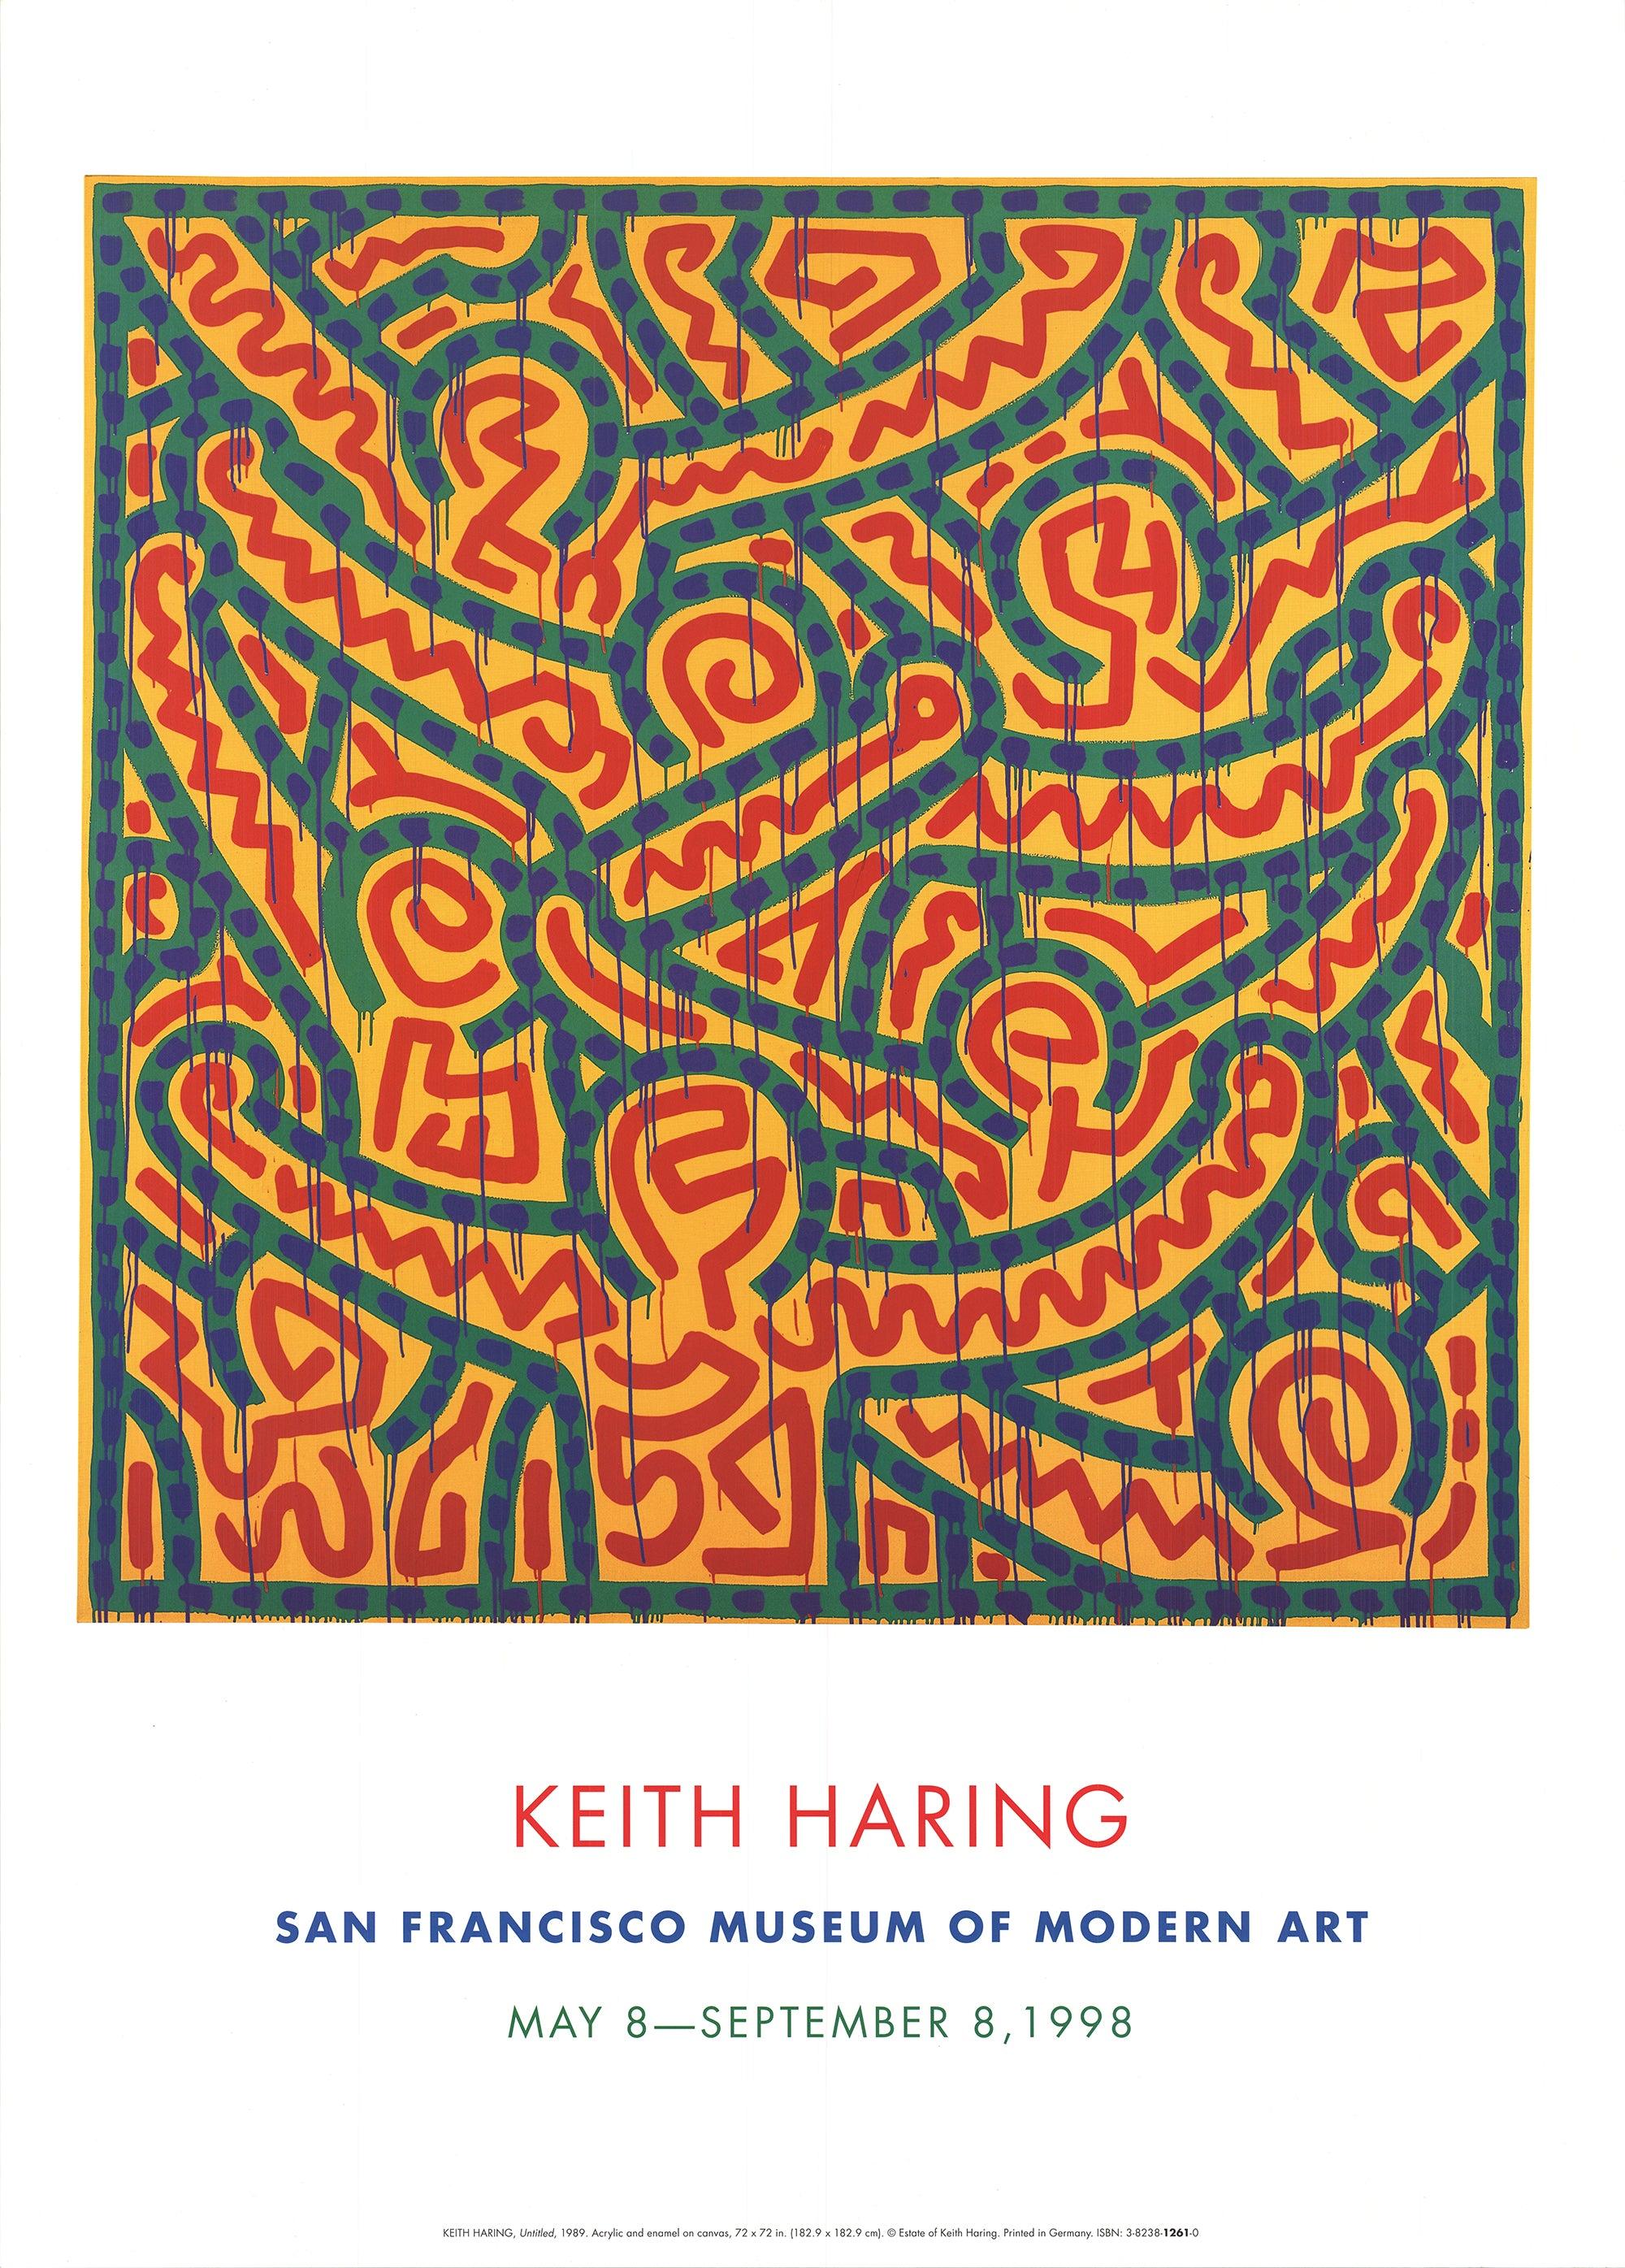 Paper Size: 36.5 x 26.5 inches ( 92.71 x 67.31 cm )
Image Size: 23.5 x 23.5 inches ( 59.69 x 59.69 cm )
Framed: No
Condition: A: Mint

Additional Details: Original exhibition poster for Keith Haring at the San Francisco Museum of Modern Art in